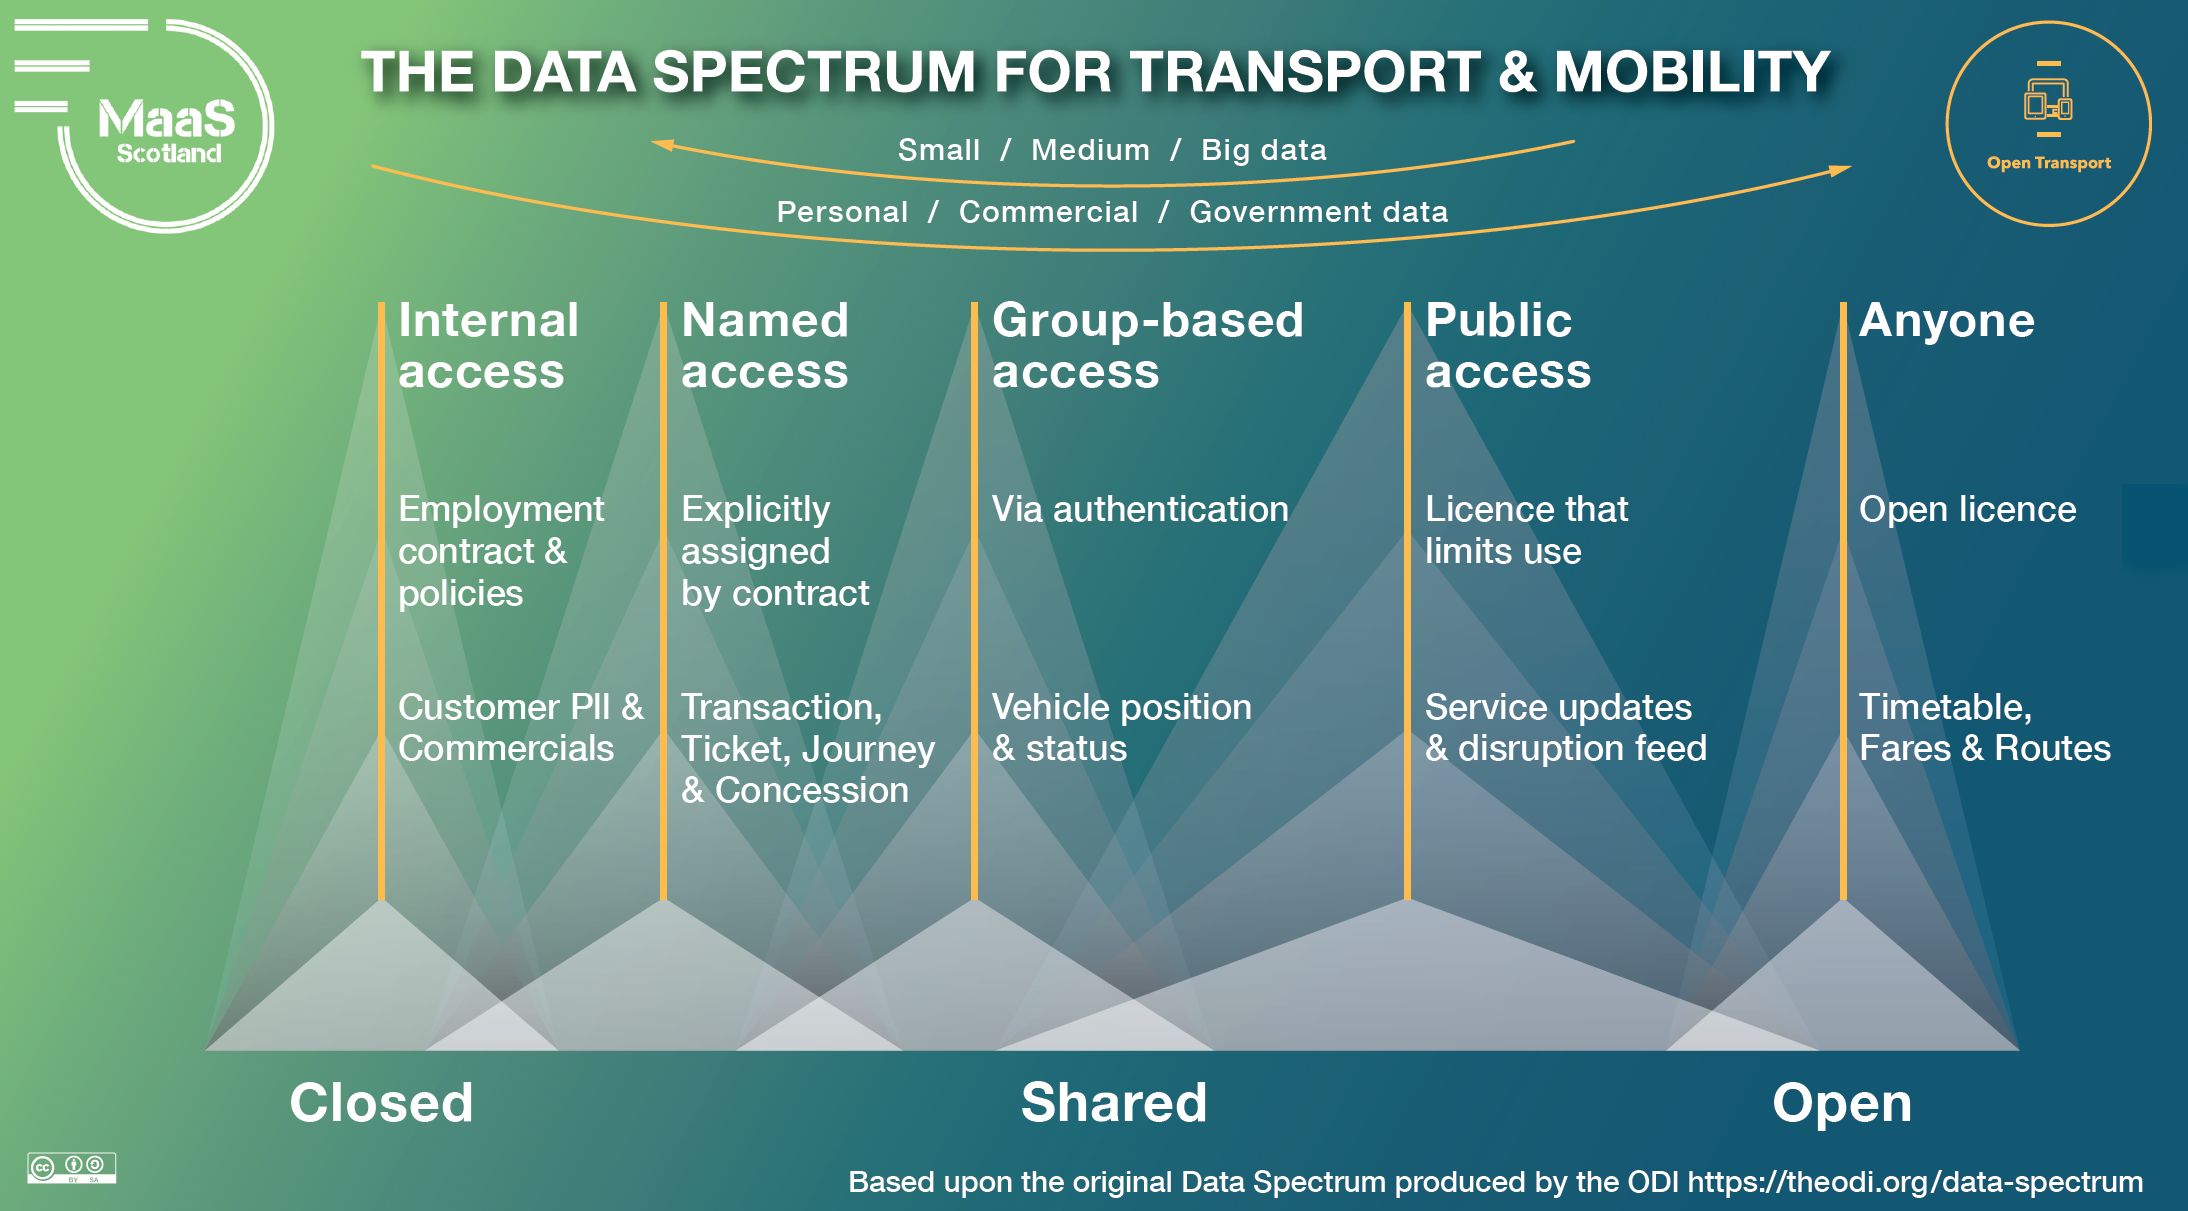 Release of The Data Spectrum for Transport and Mobility, June 2021